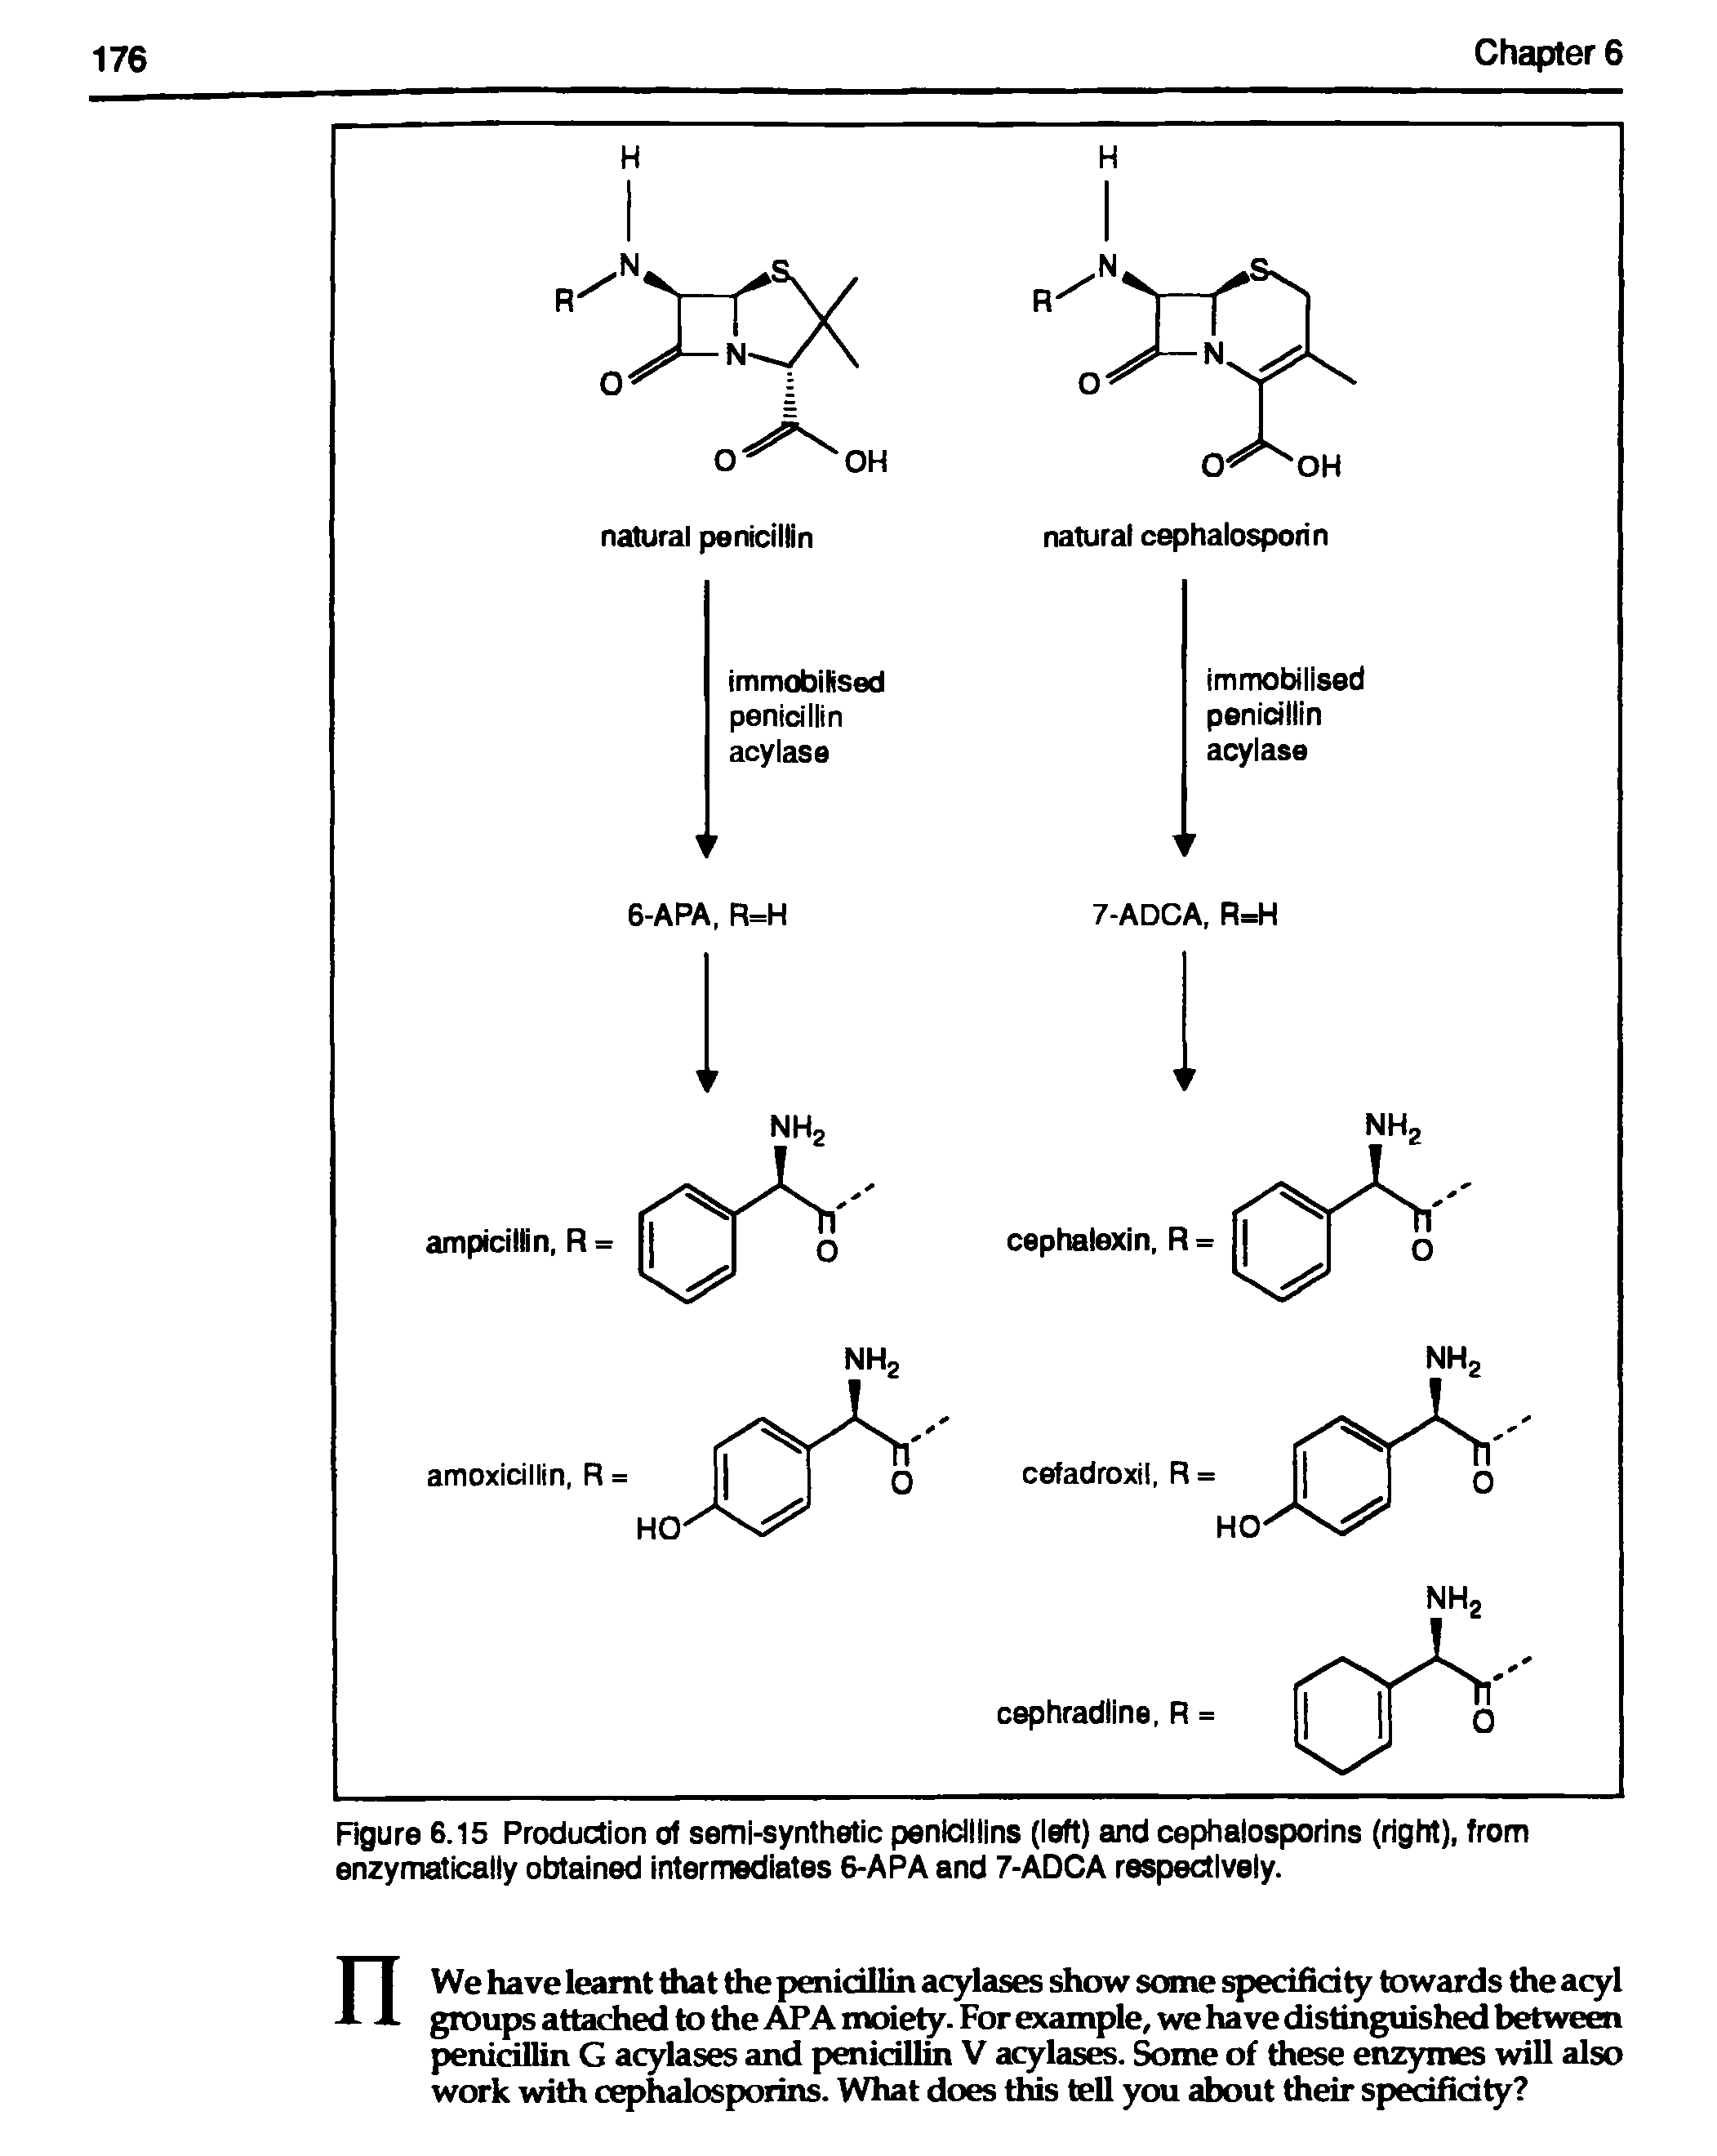 Figure 6.15 Production of semi-synthetic penicillins (left) and cephalosporins (right), from enzymatically obtained intermediates 6-APA and 7-ADCA respectively.